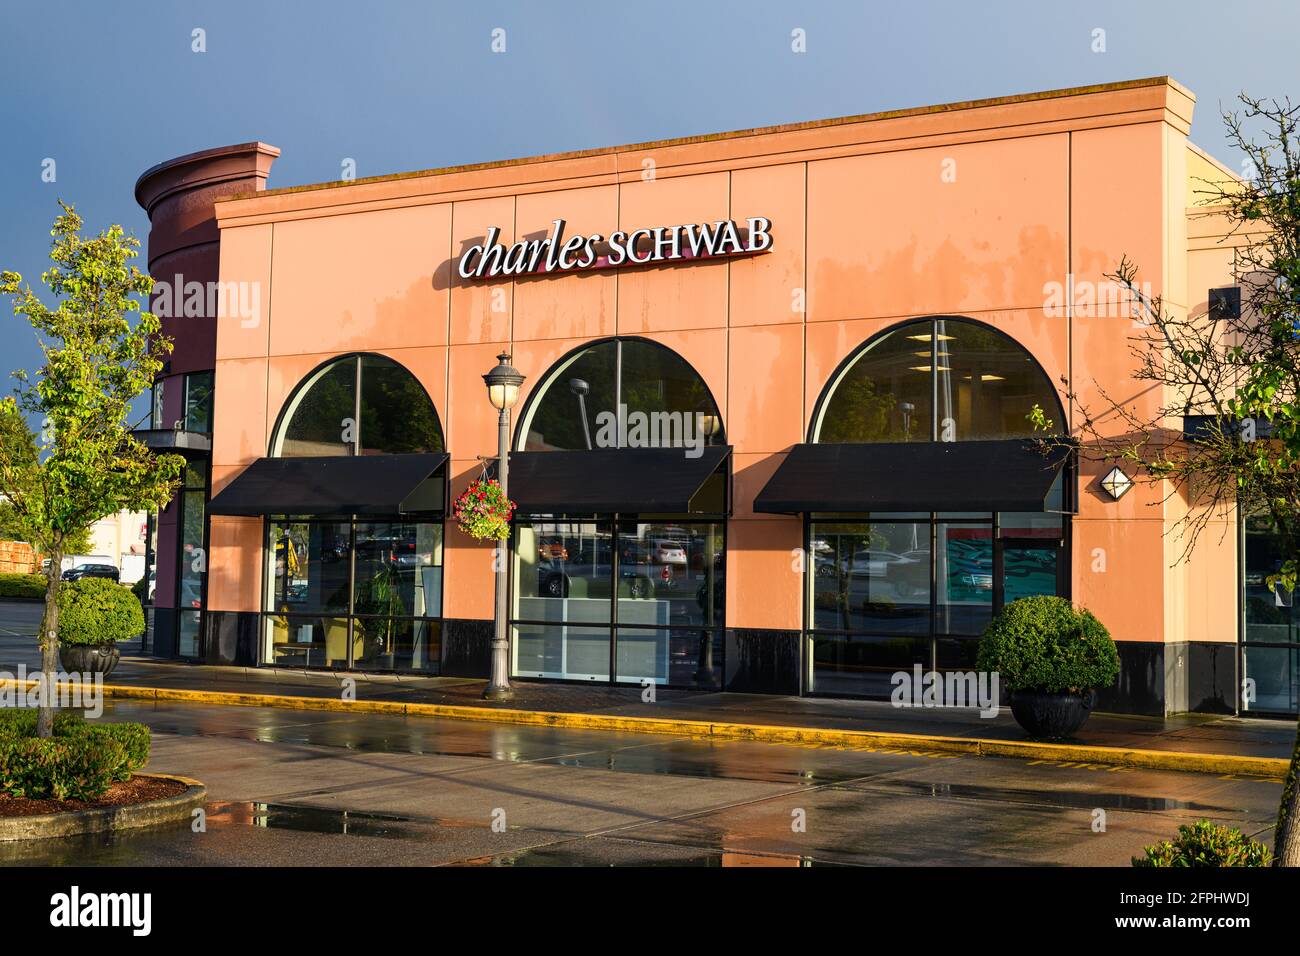 Redmond, WA, USA - May 20, 2021; Redmond office of the Charles Schwab financial business at the Bella Bottega Shopping Center after a rain storm Stock Photo